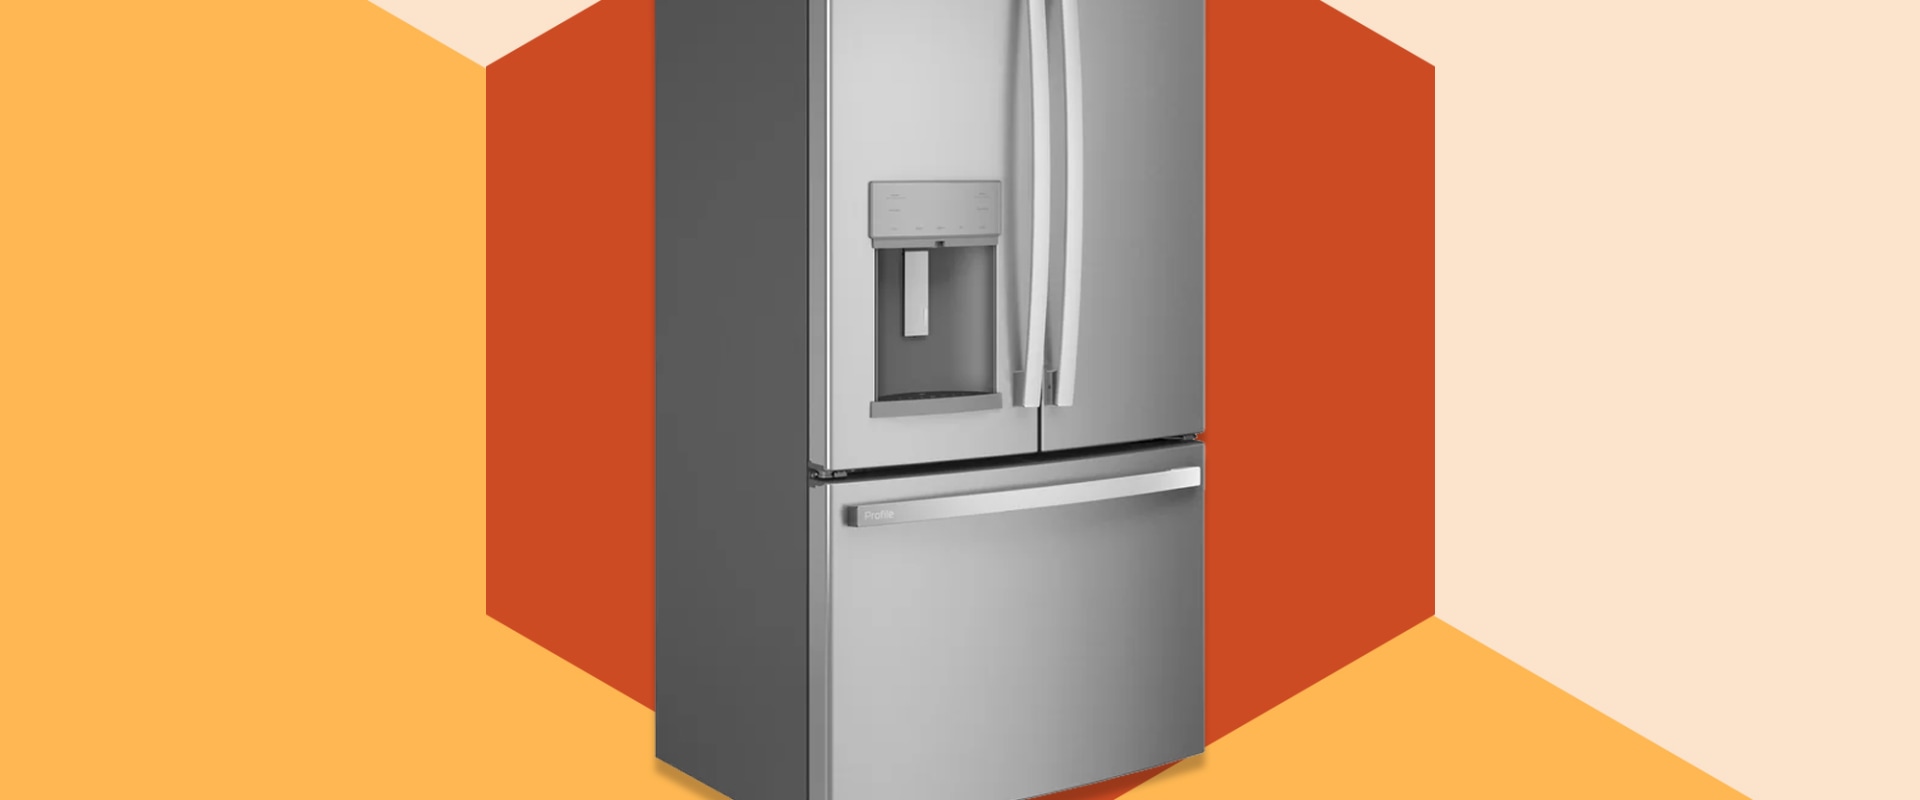 What brand of refrigerator has the least problems?